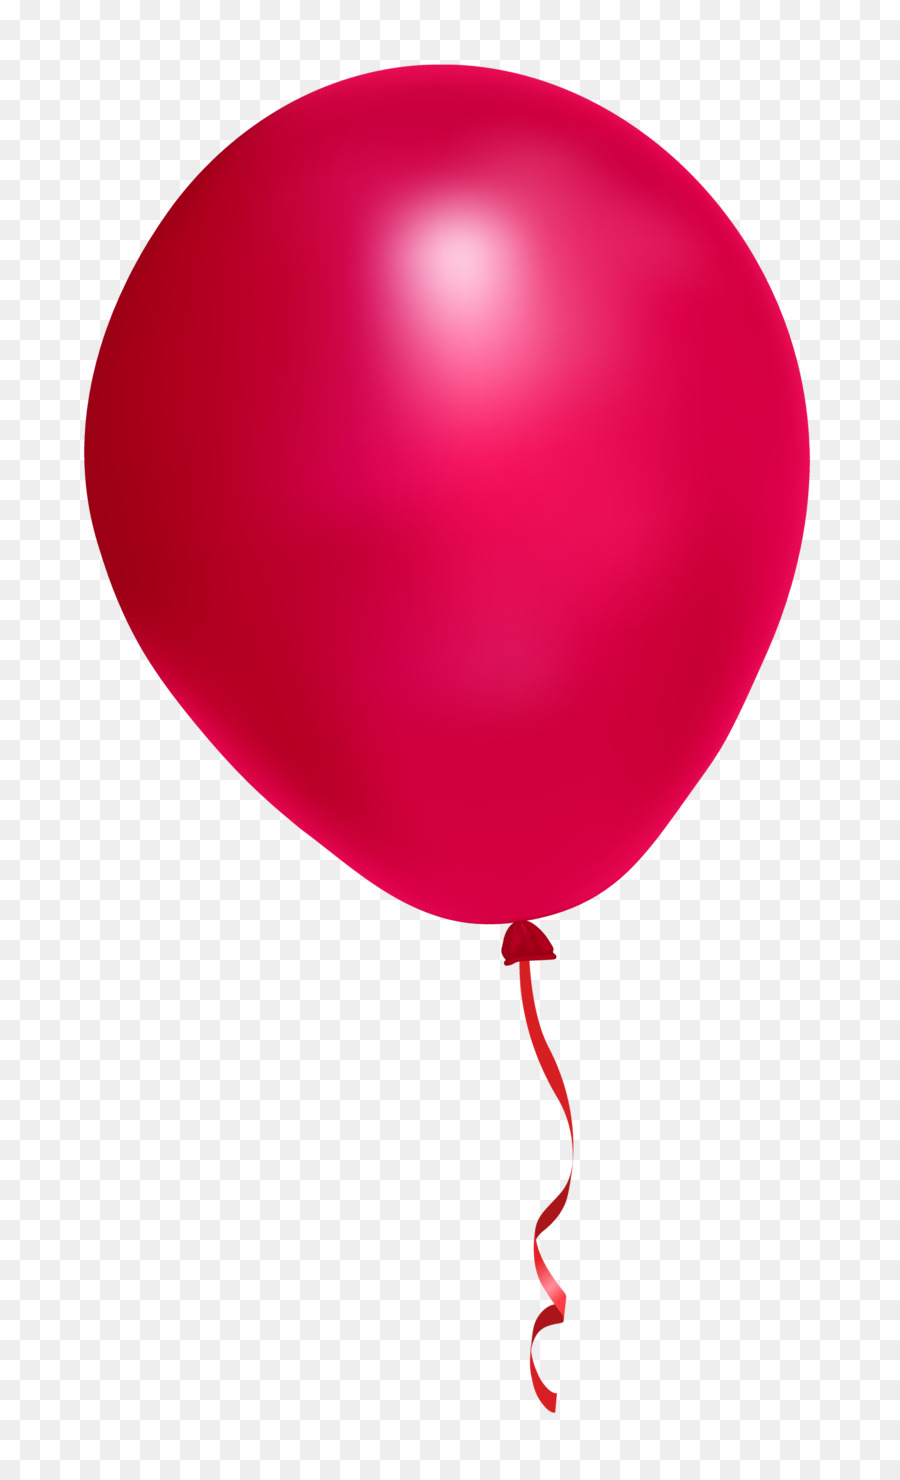 Balloon Party Acquasparta Birthday Child - Pink Color Balloon png download - 2368*3880 - Free Transparent Balloon png Download.